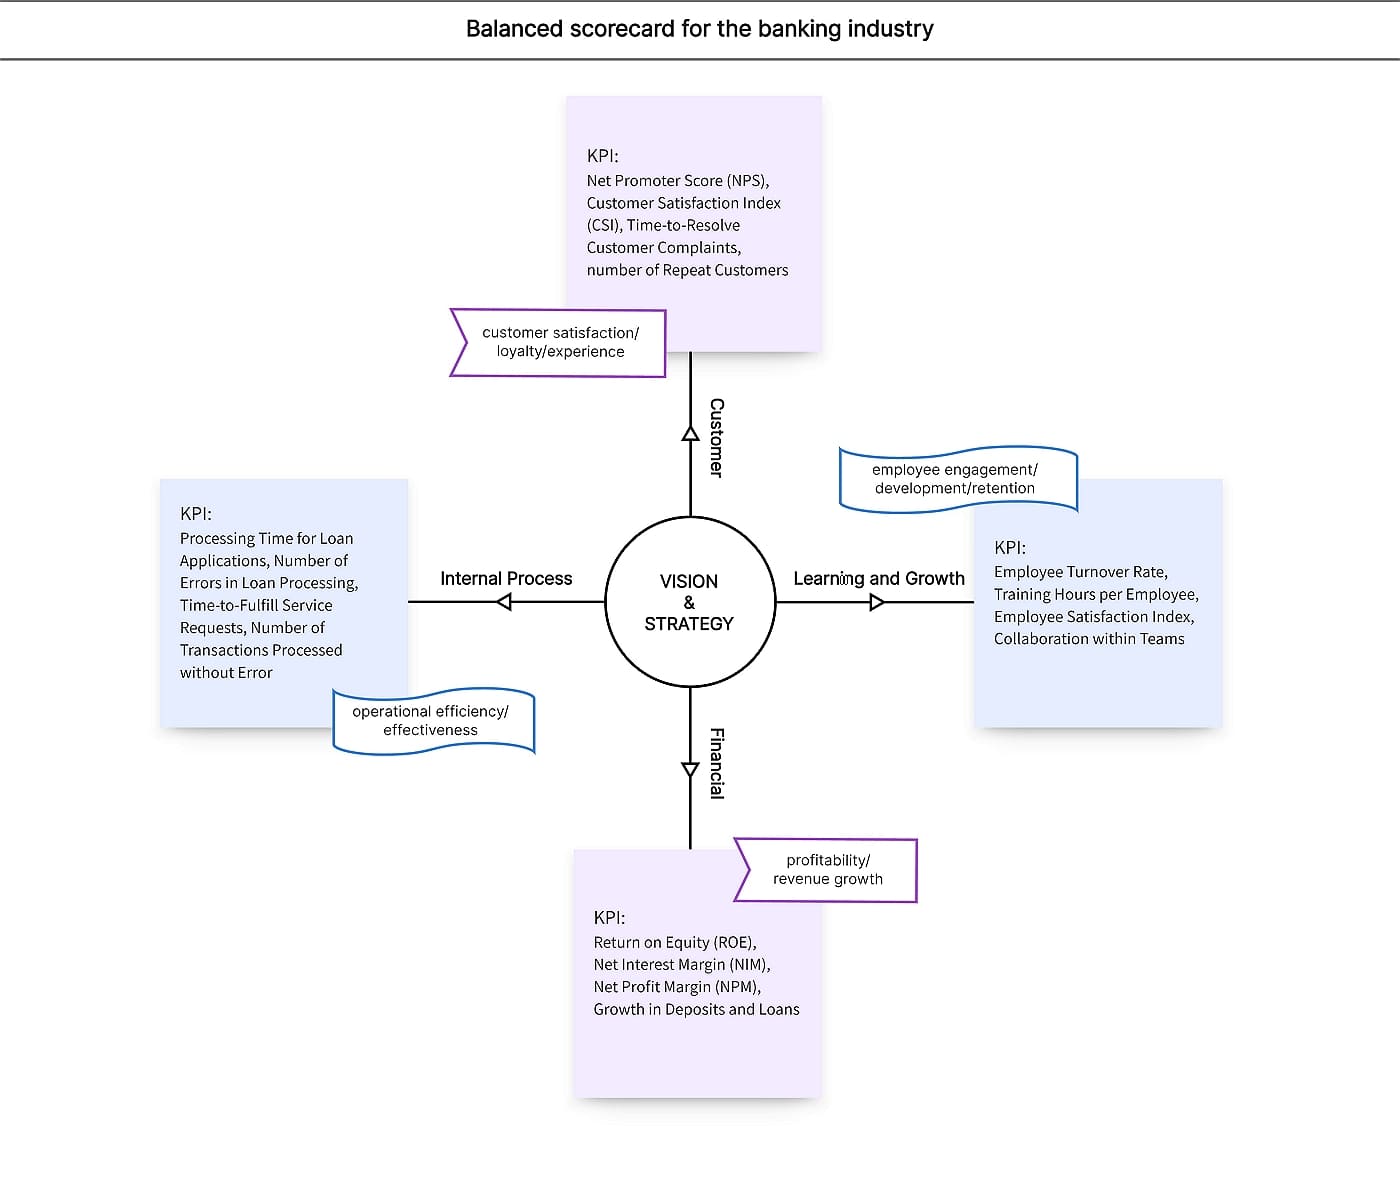 Balanced scorecard for the Banking Industry